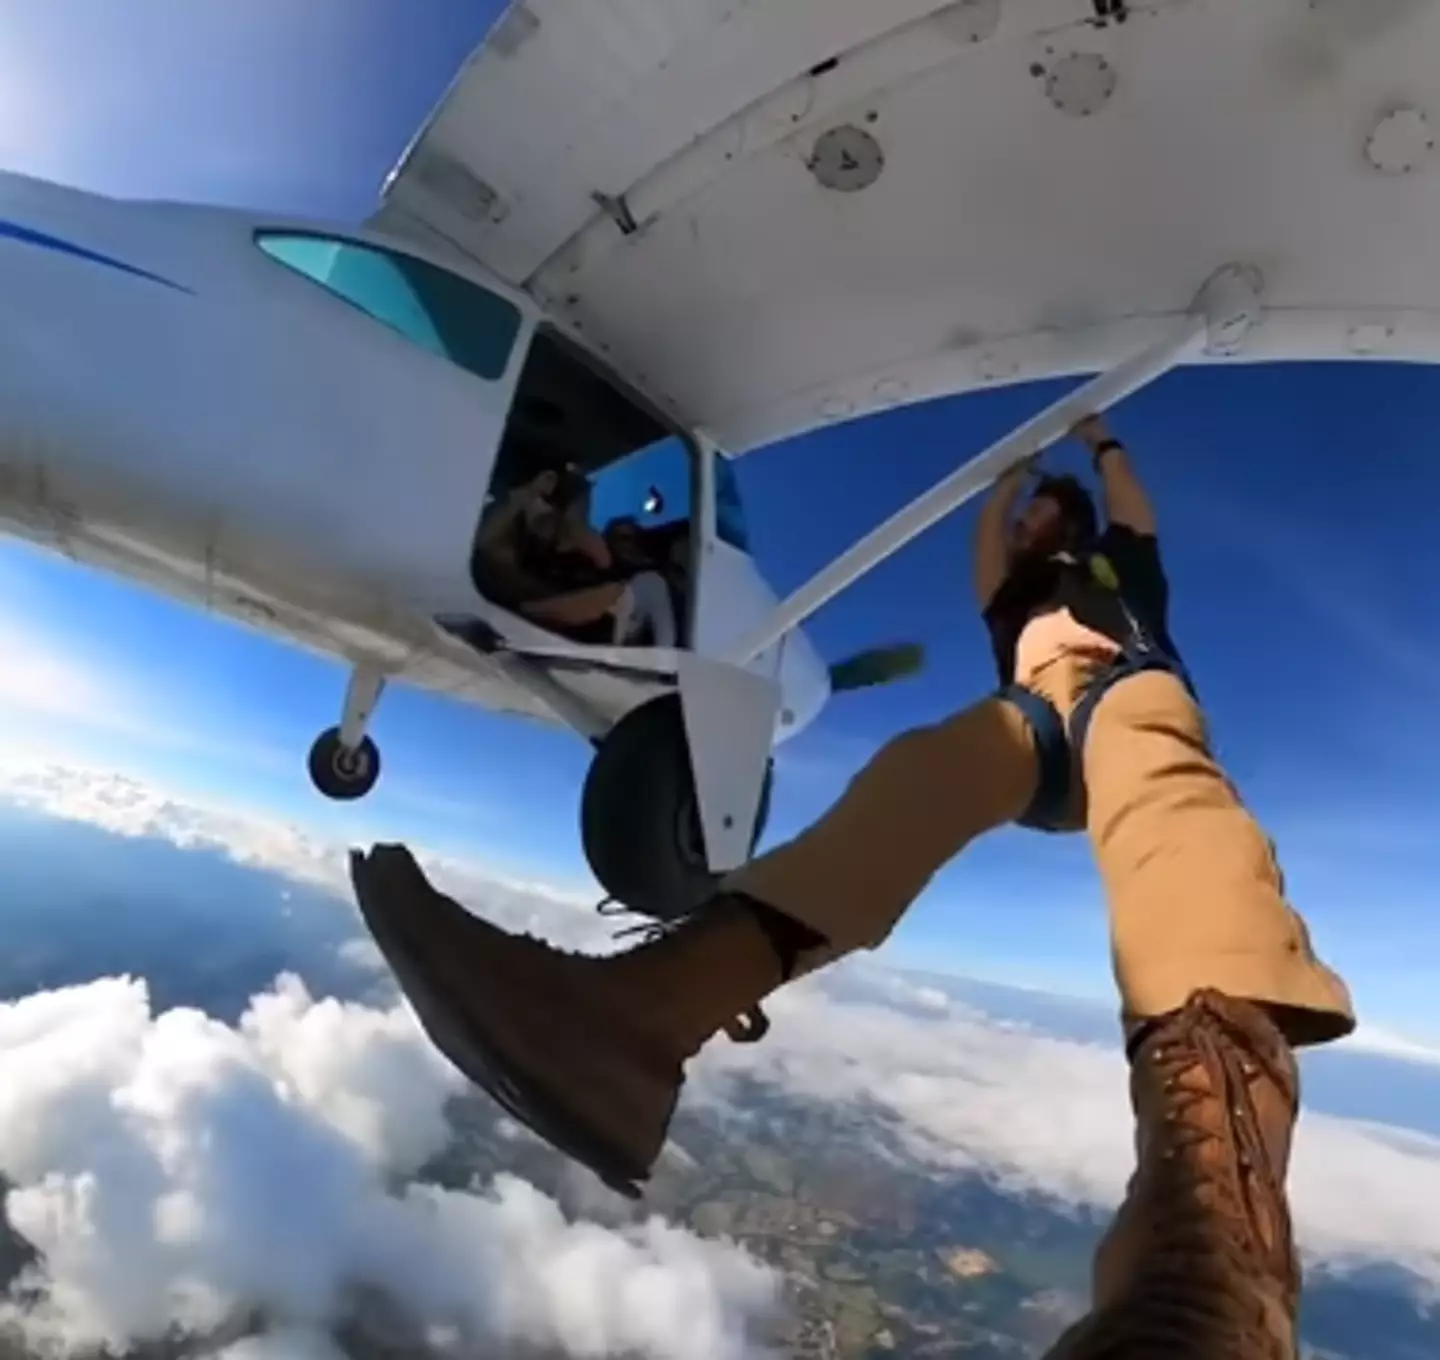 Skydiver Shares Footage of Freefall Through Cloud.